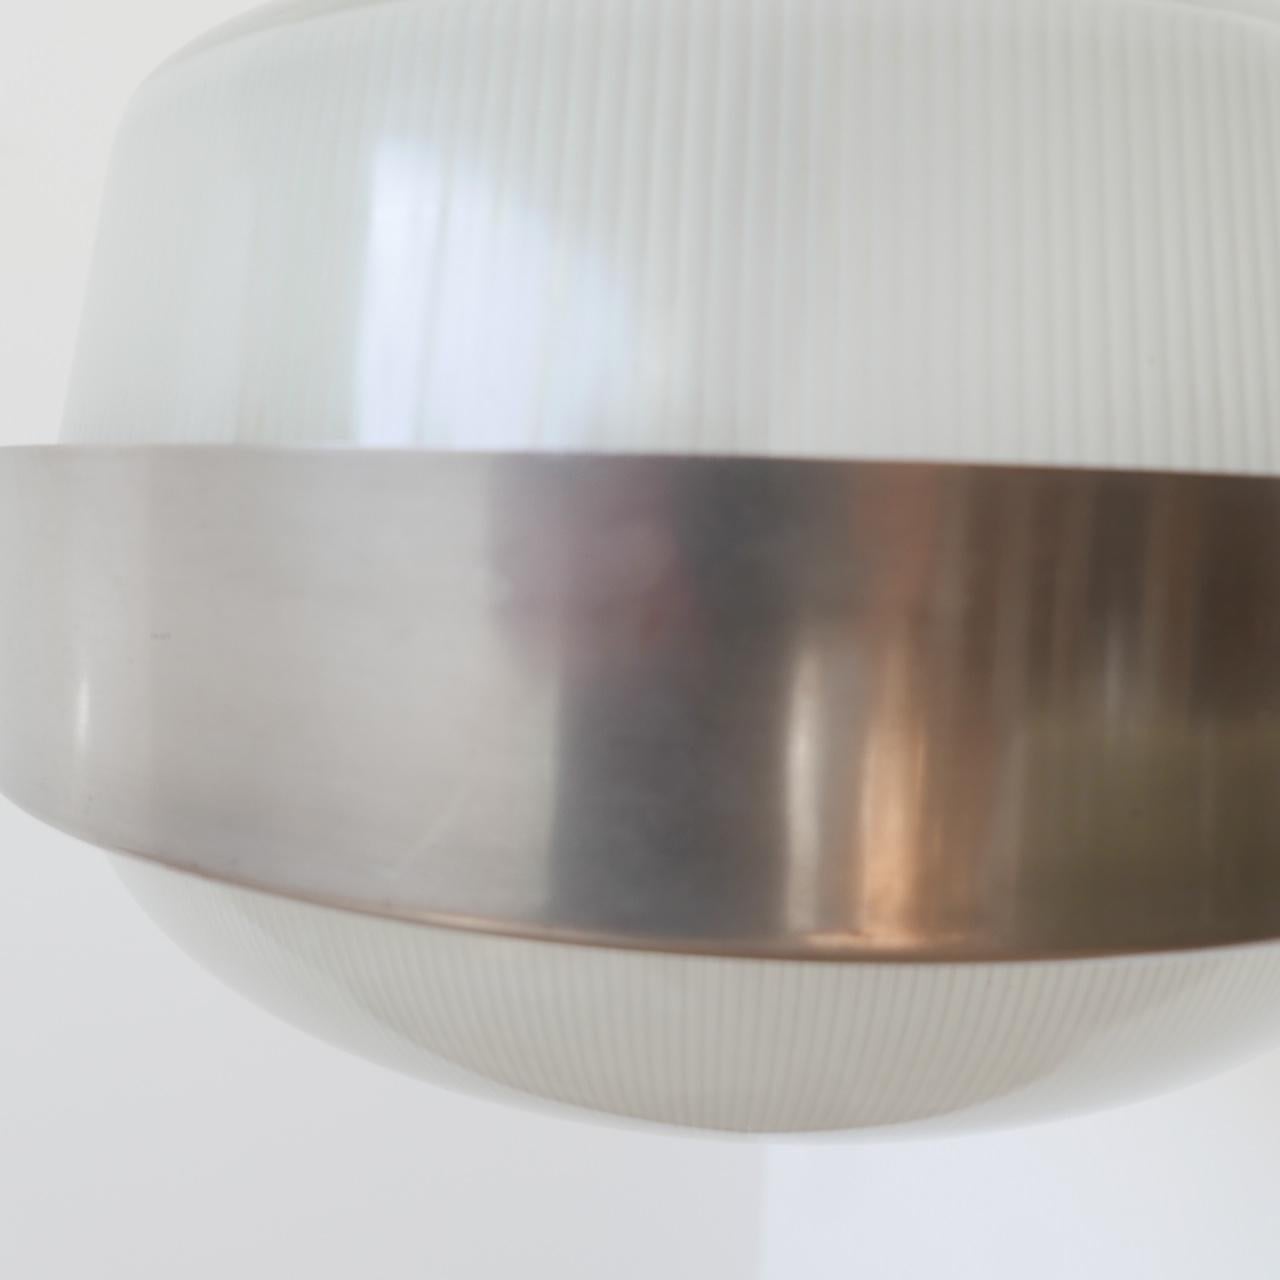 A Italian pendant light, attributed to Sergio Mazza for Artemide,

circa 1970s, Italy.

Two tone glass, with a nickel gallery and surround.

Re-wired and PAT tested.

Dimensions: approx. 40 diameter x 36 height (top of gallery) x 103 total